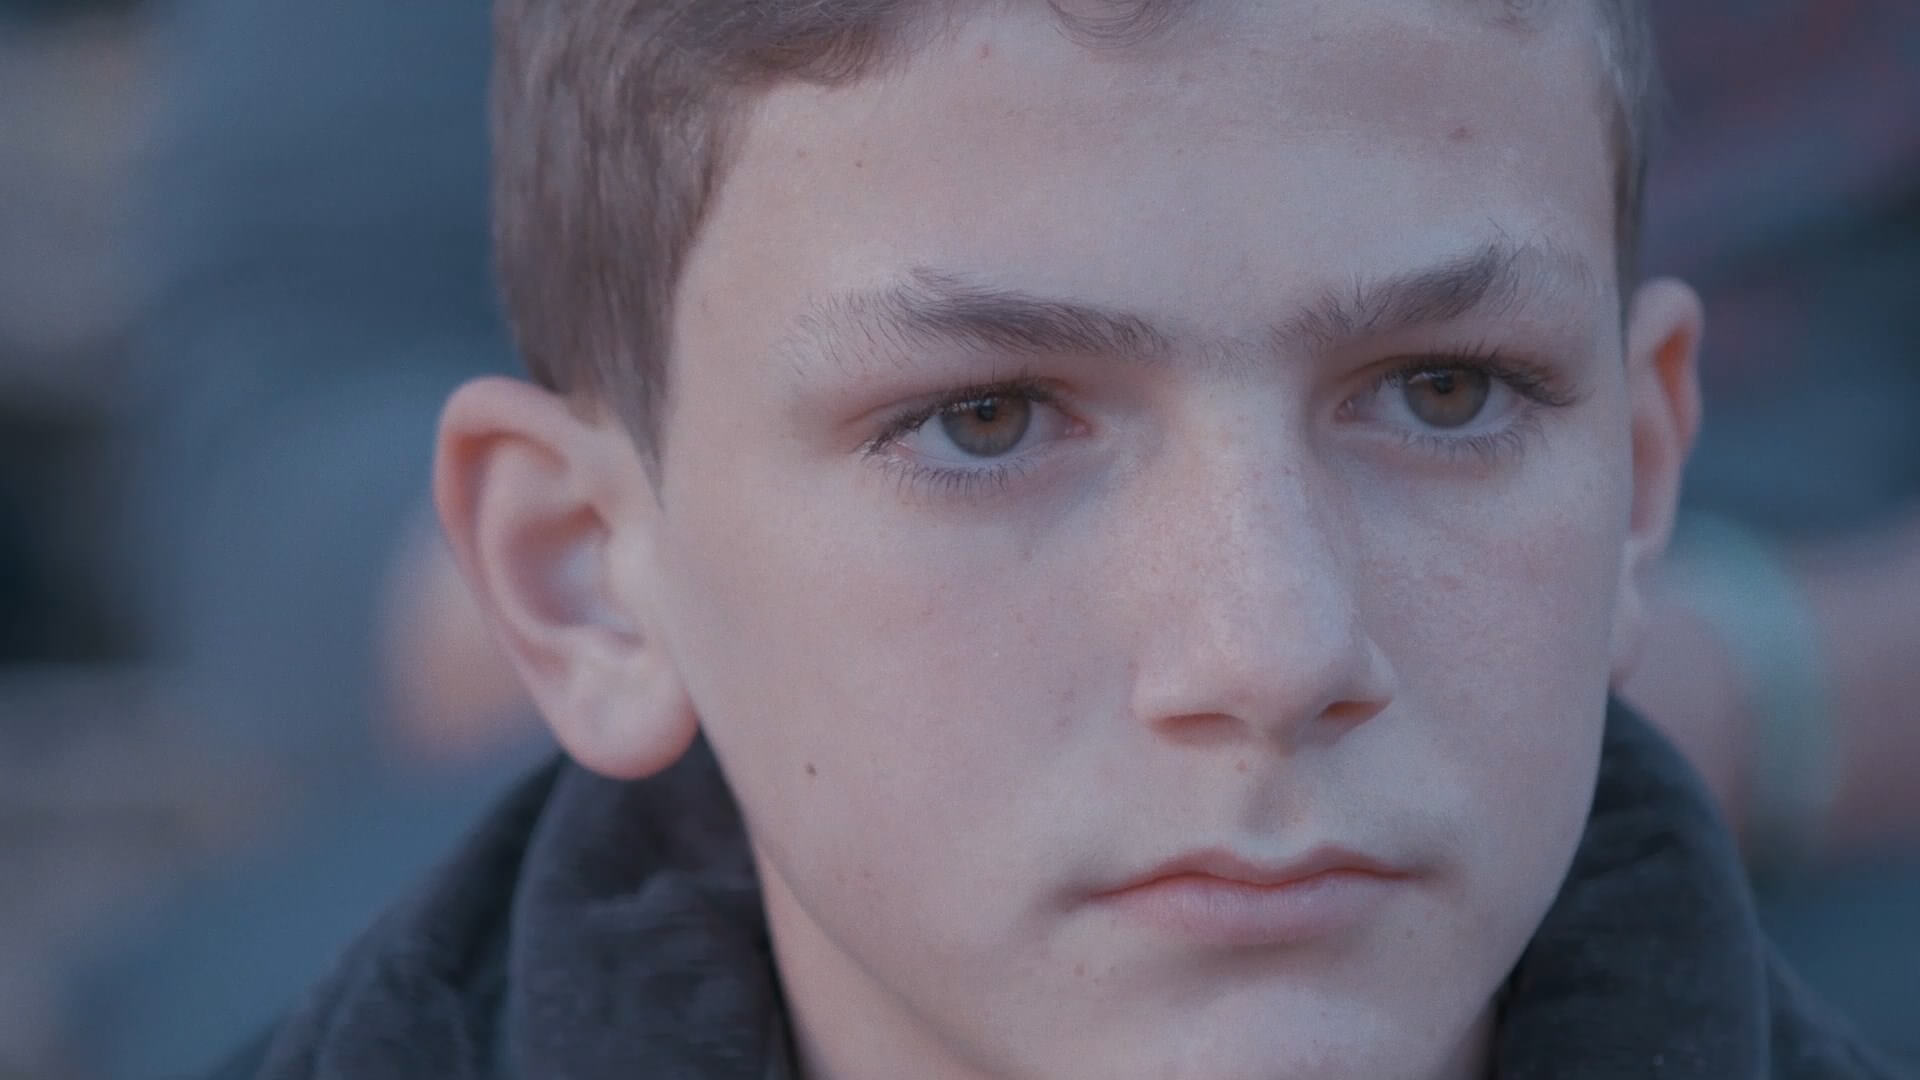 A close-up shot of a boy looking off into the distance. He has short brown hair and brown eyes.